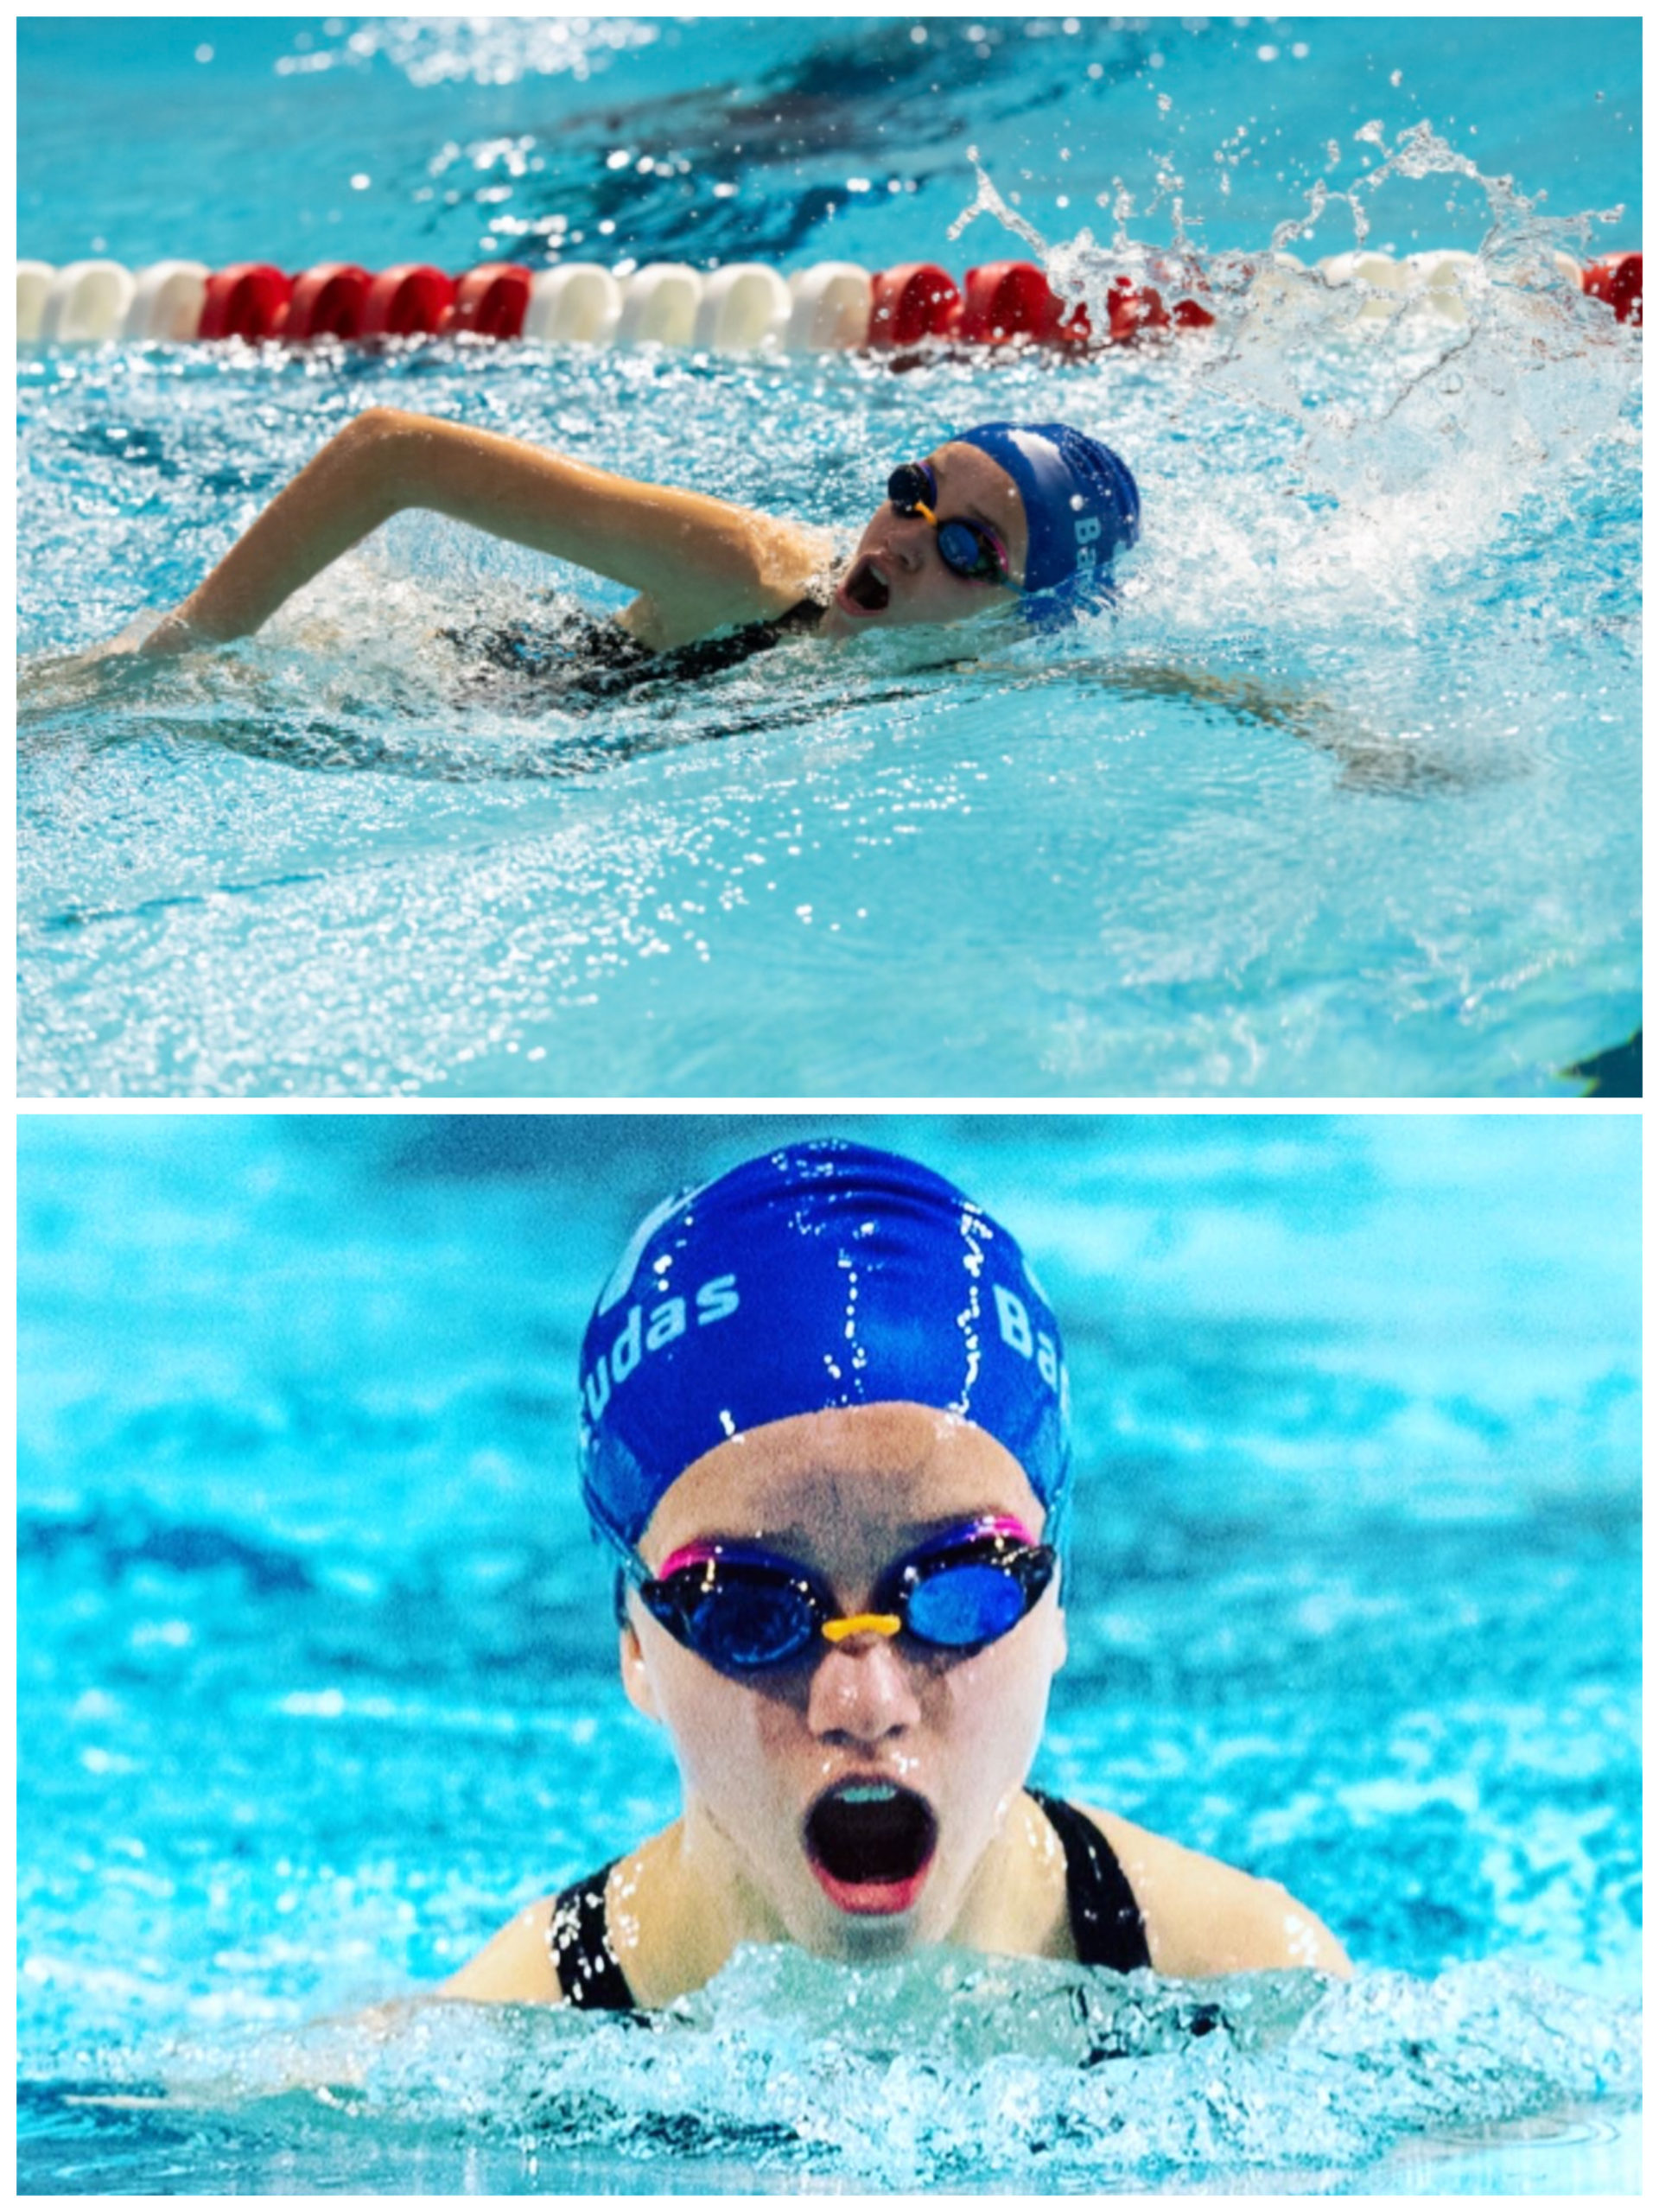 Two pictures stacked on each other both of a female athlete in a smiling pool coming up from the water to take a breath